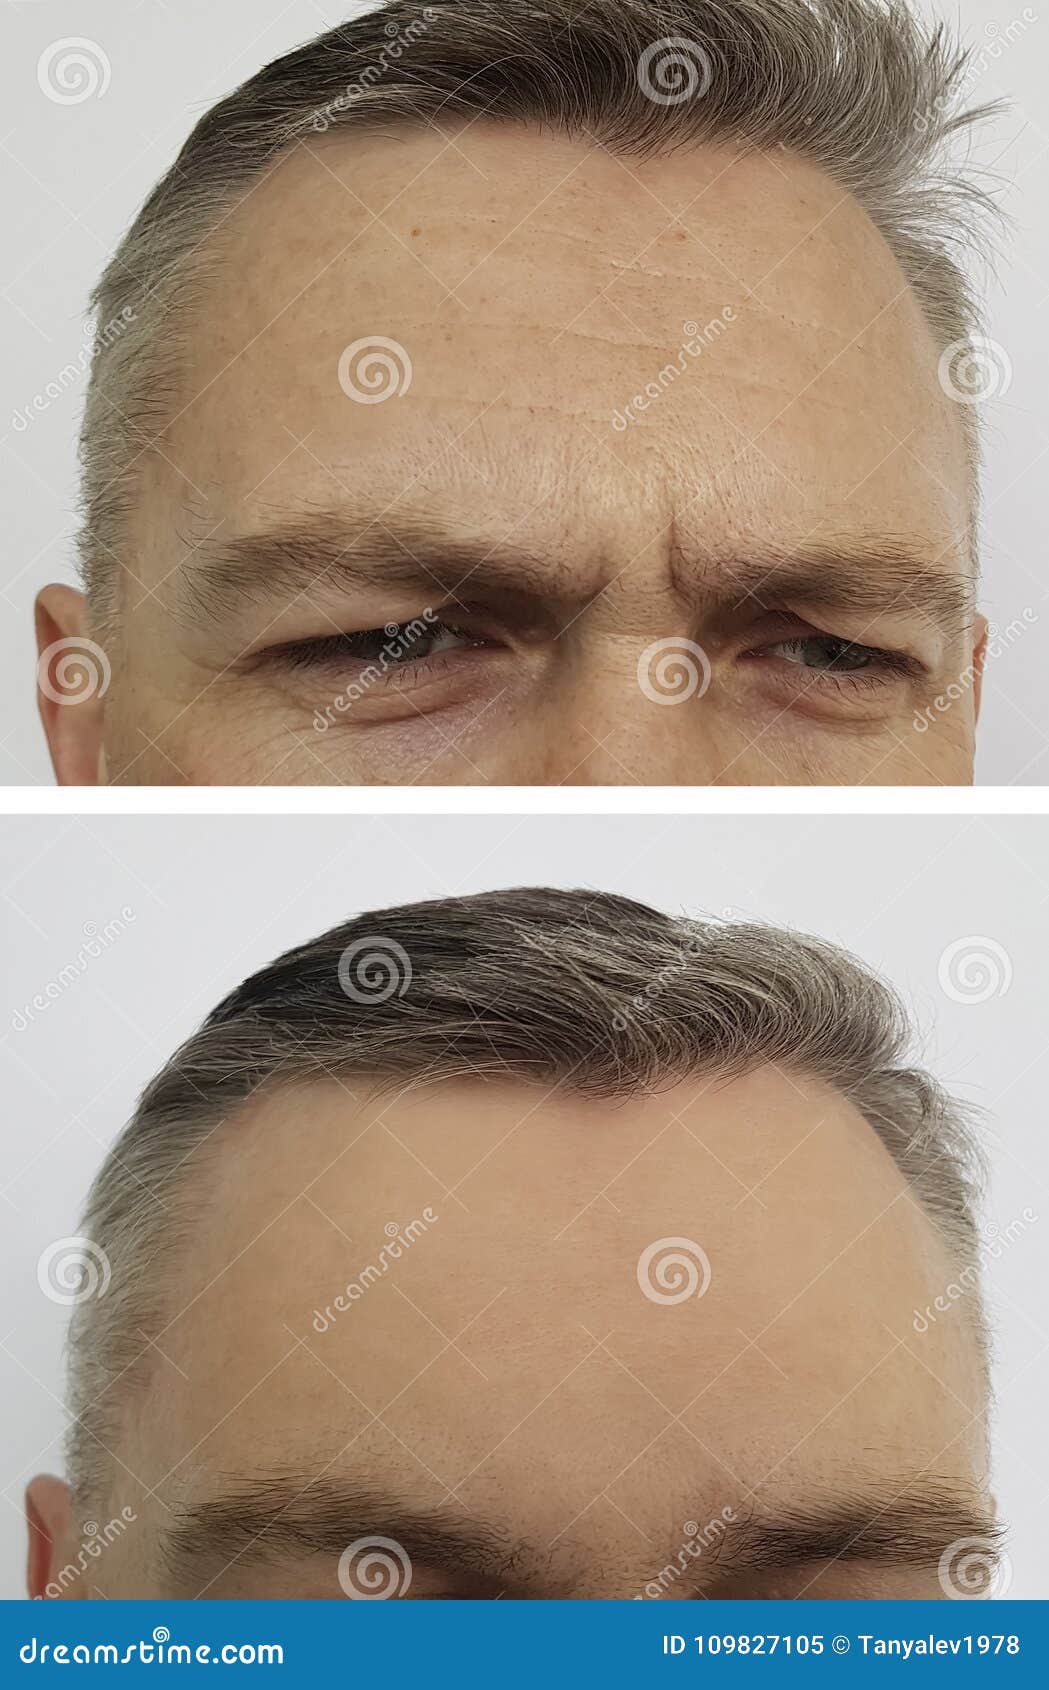 man wrinkles on the forehead before and after botox